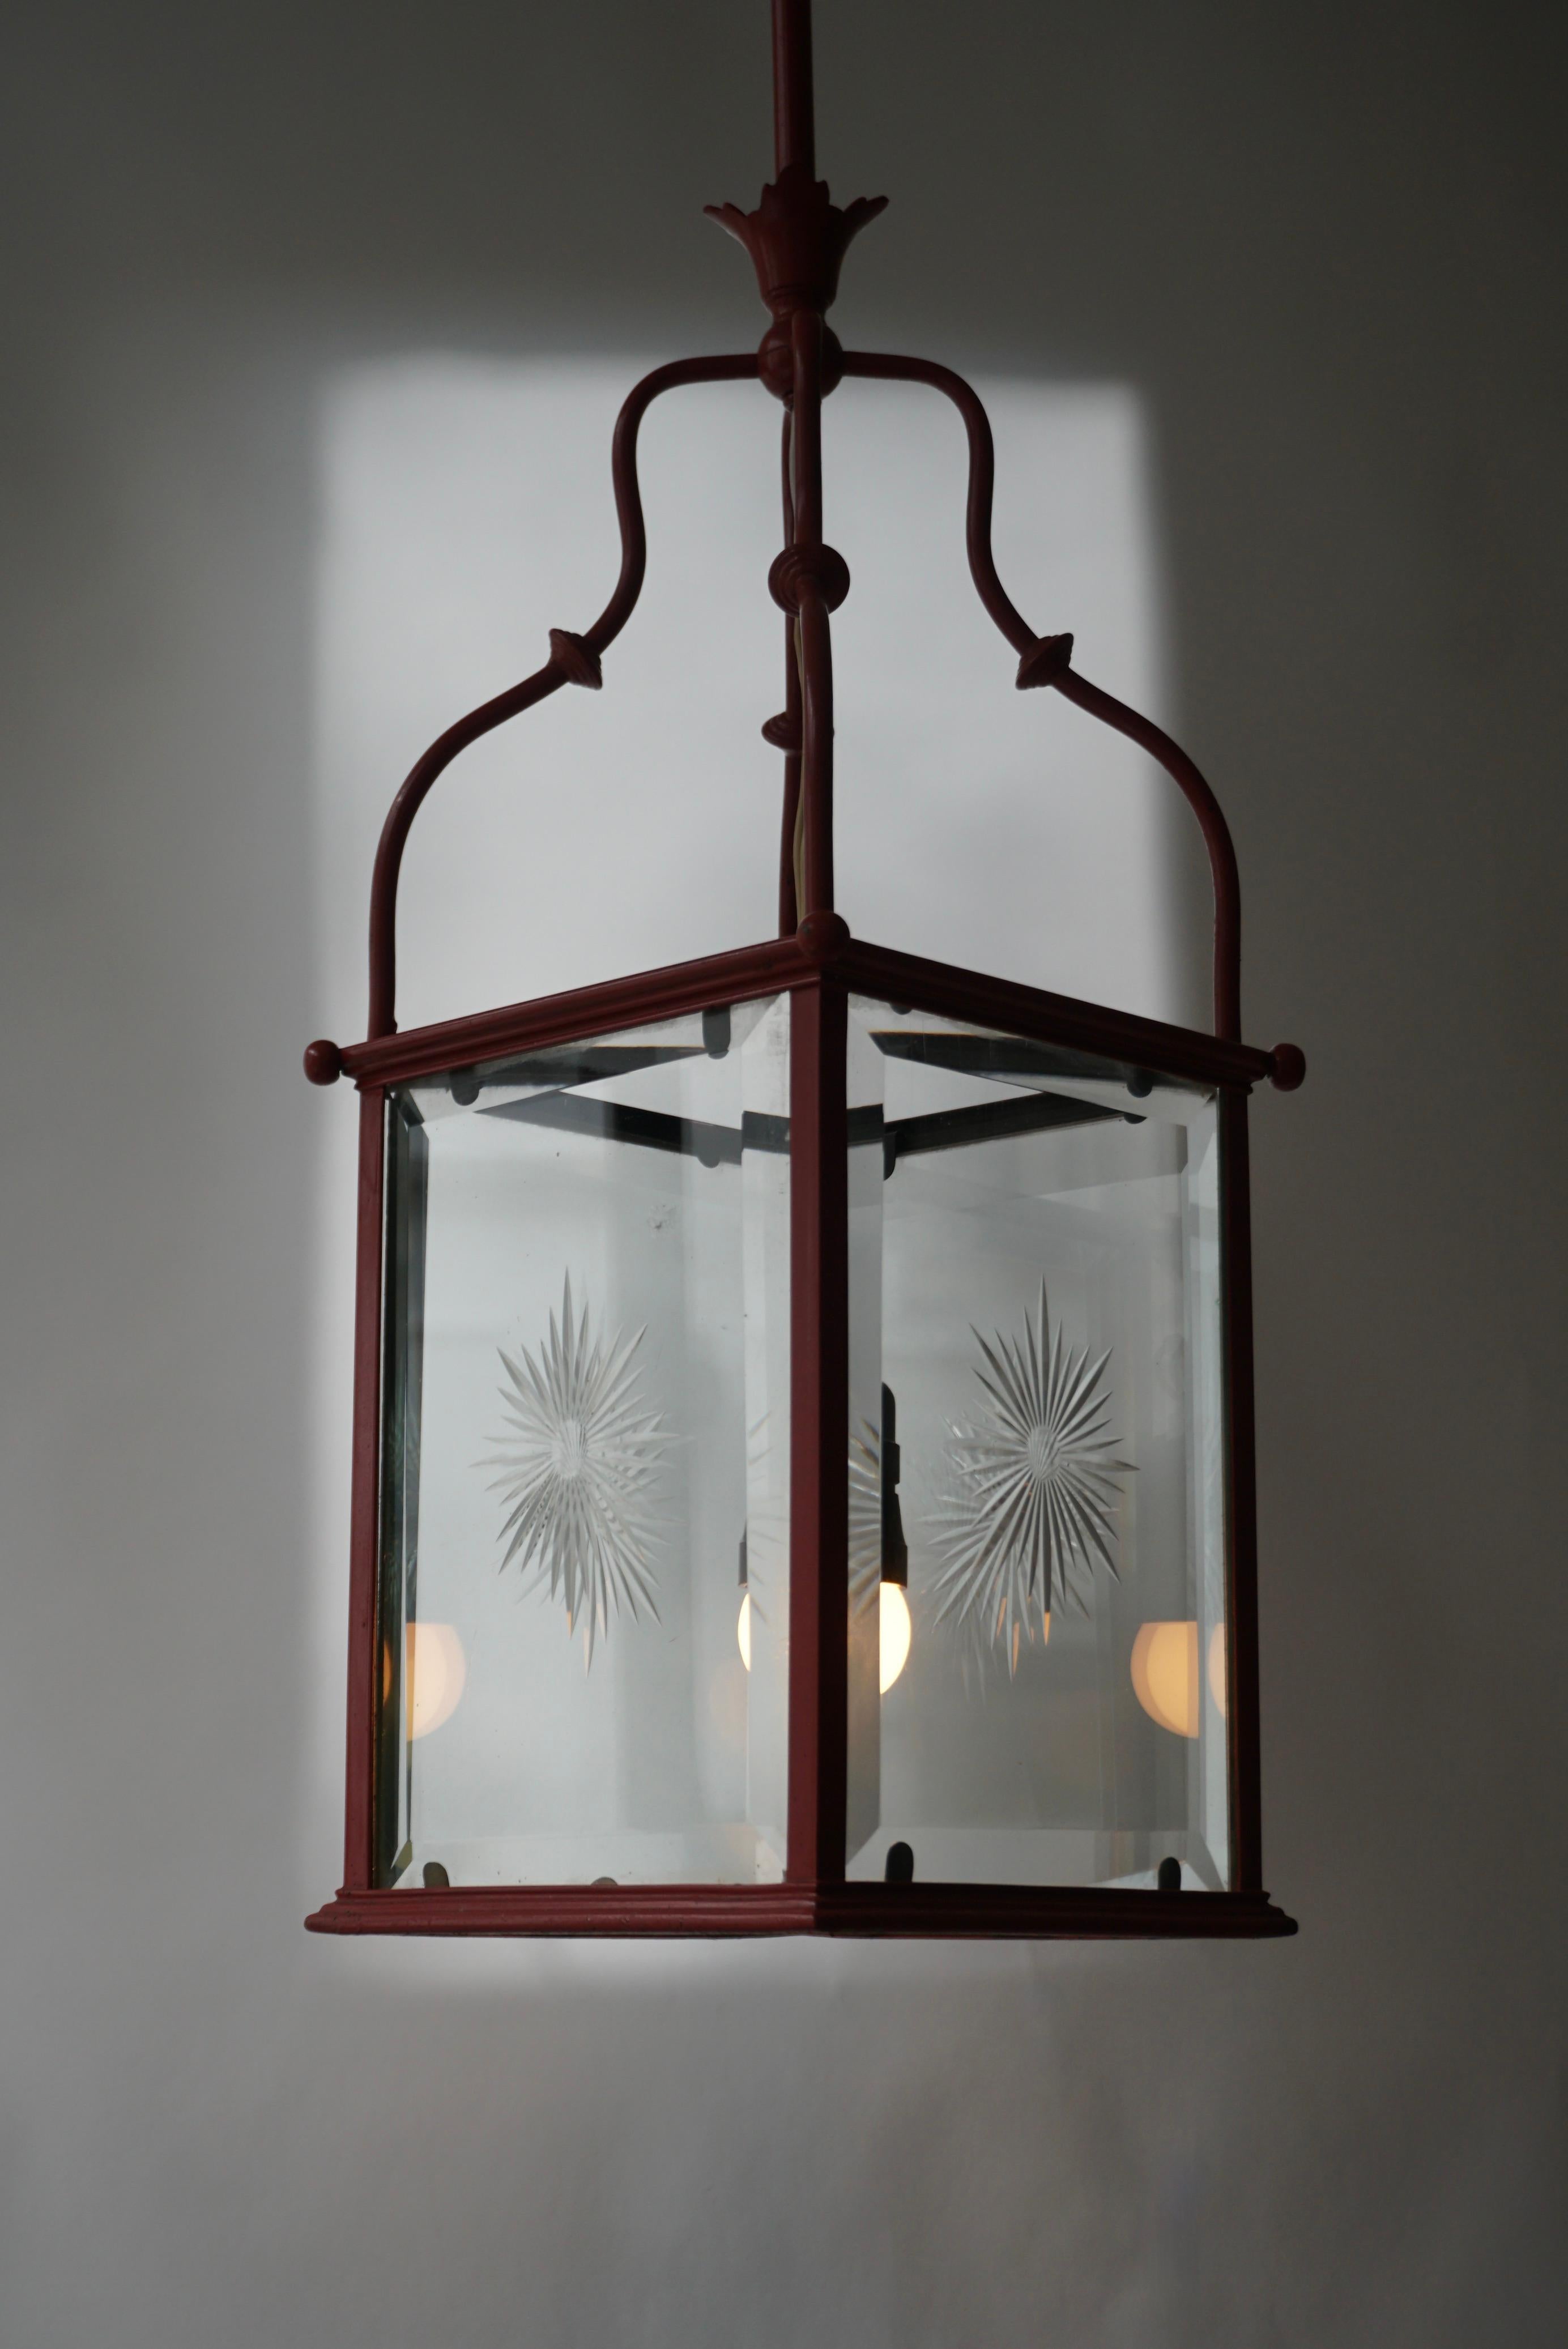 An Italian Red Tole Metal Lantern with Cut Glass, Early 20th C. For Sale 7